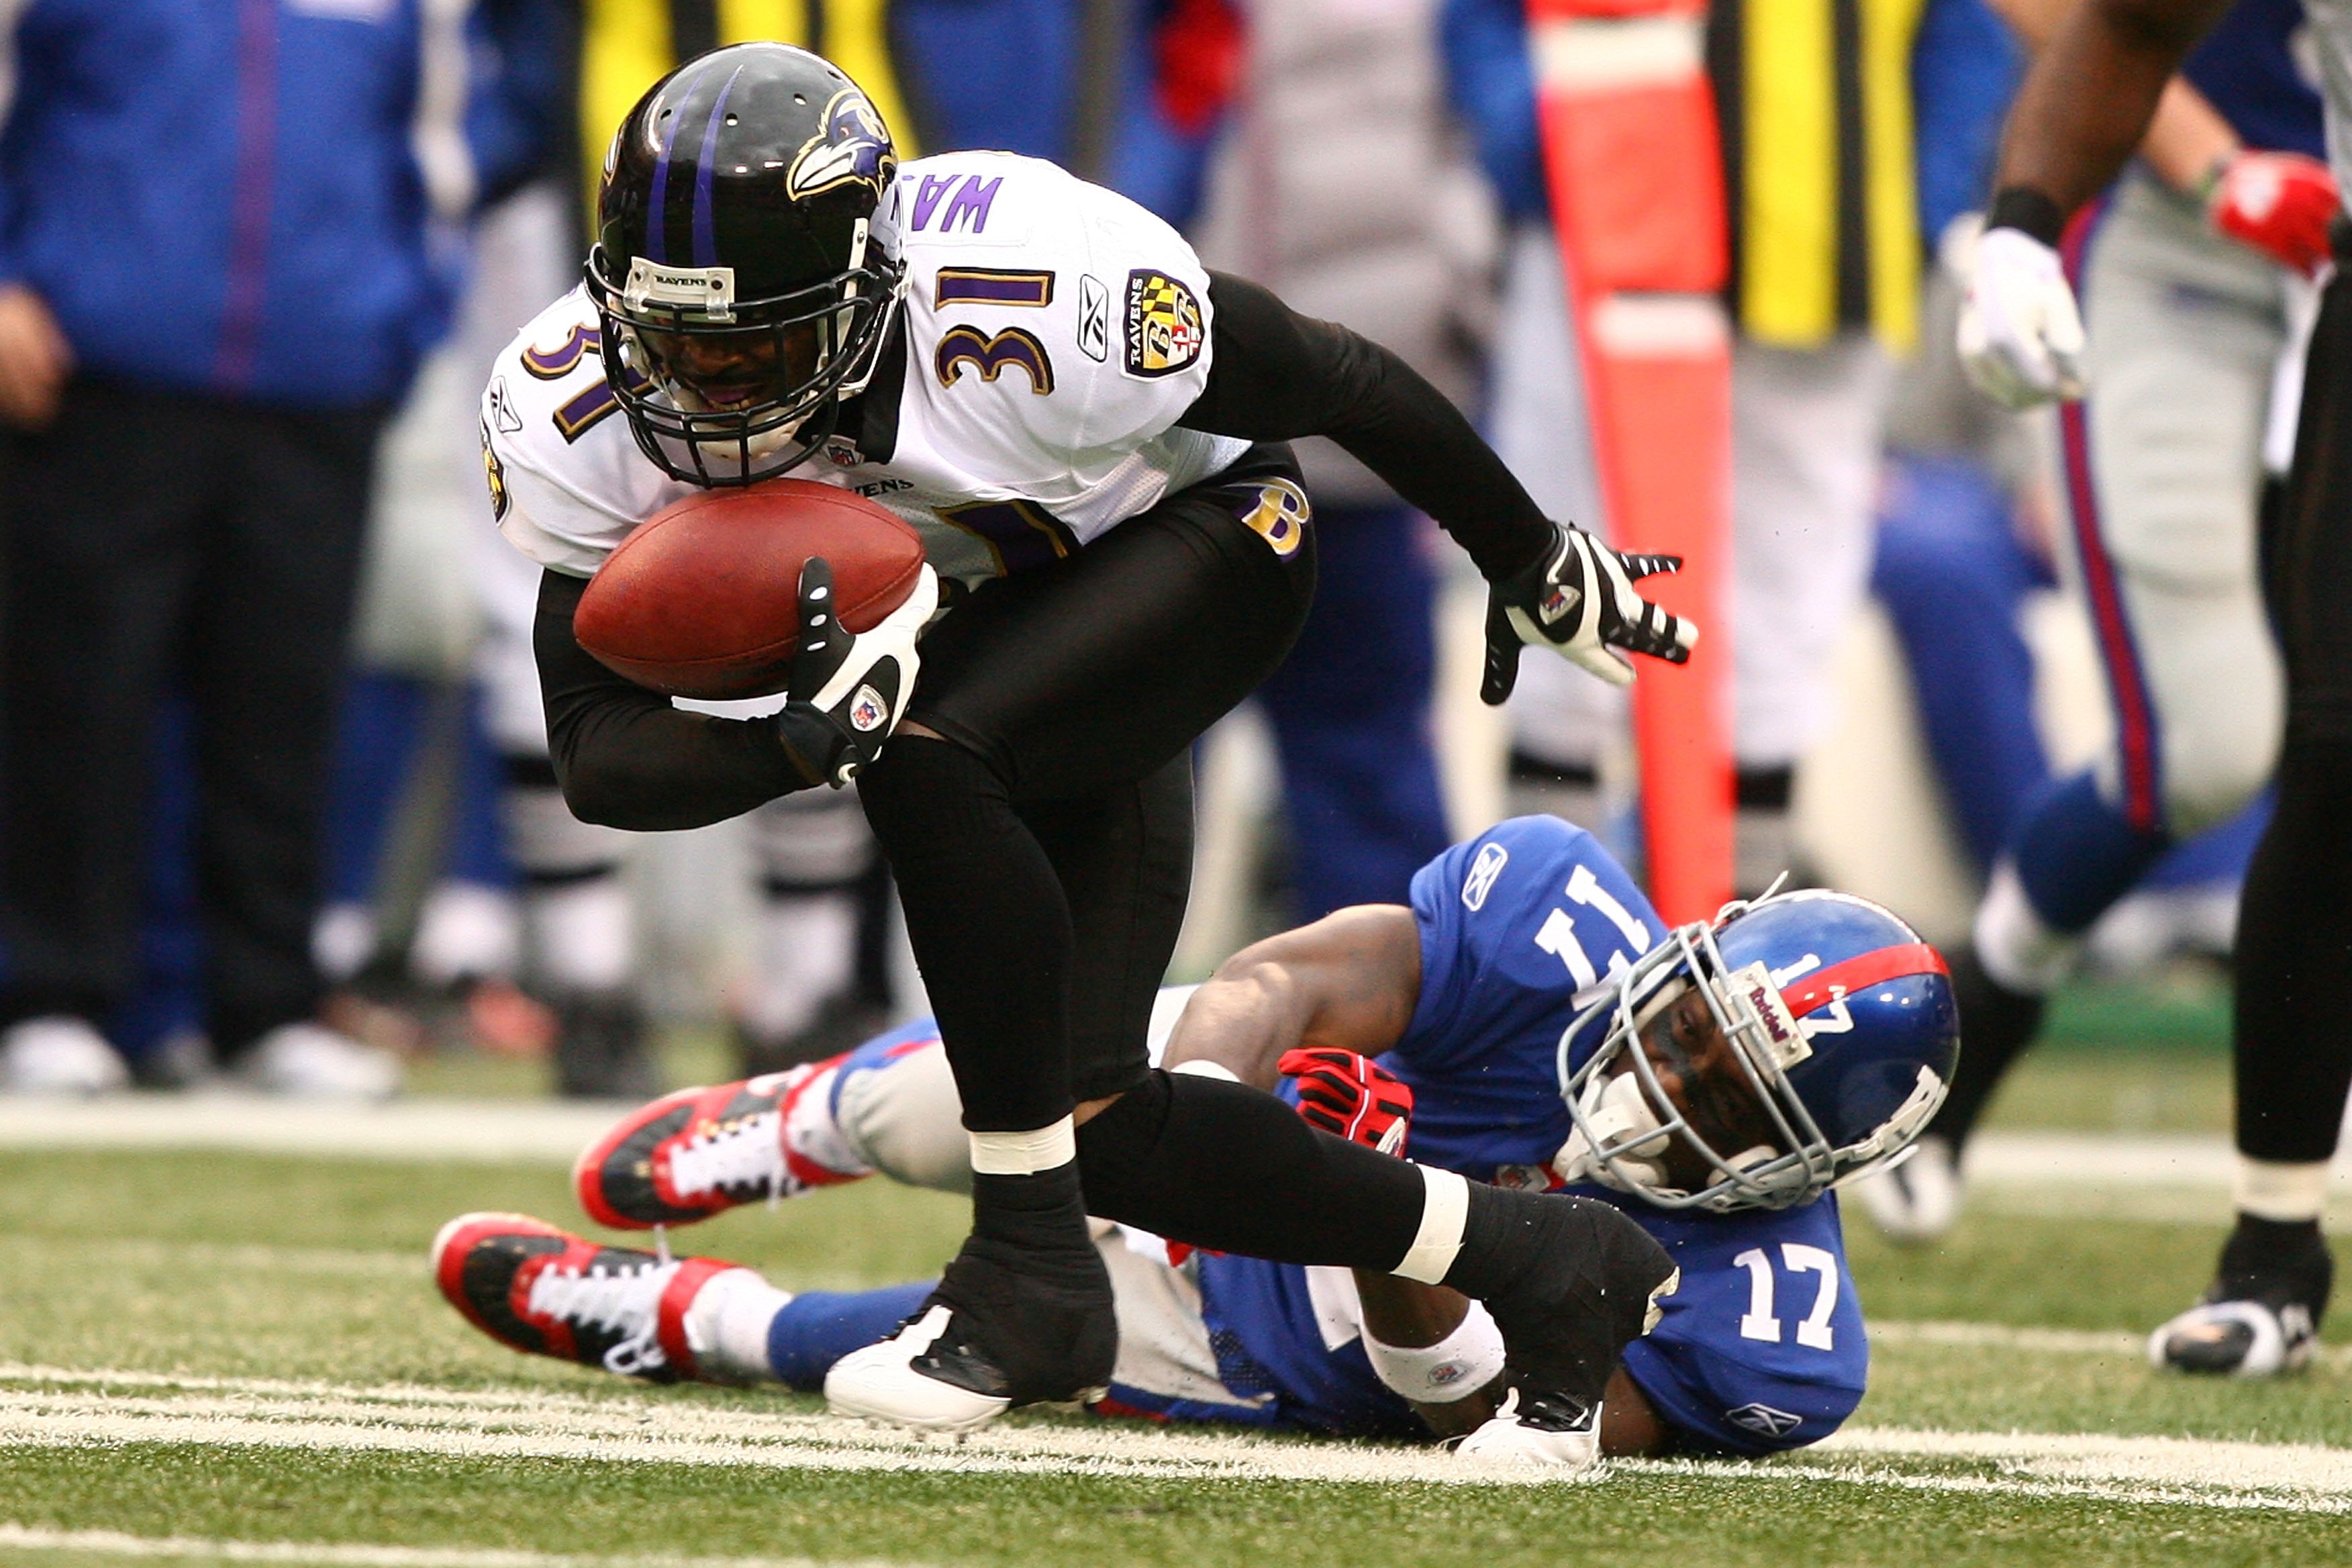 EAST RUTHERFORD, NJ - NOVEMBER 16:  Fabian Washington #31 of the Baltimore Ravens intercepts the ball as Plaxico Burress #17 of The New York Giants misses the tackle during their game on November 16, 2008 at Giants Stadium in East Rutherford, New Jersey.